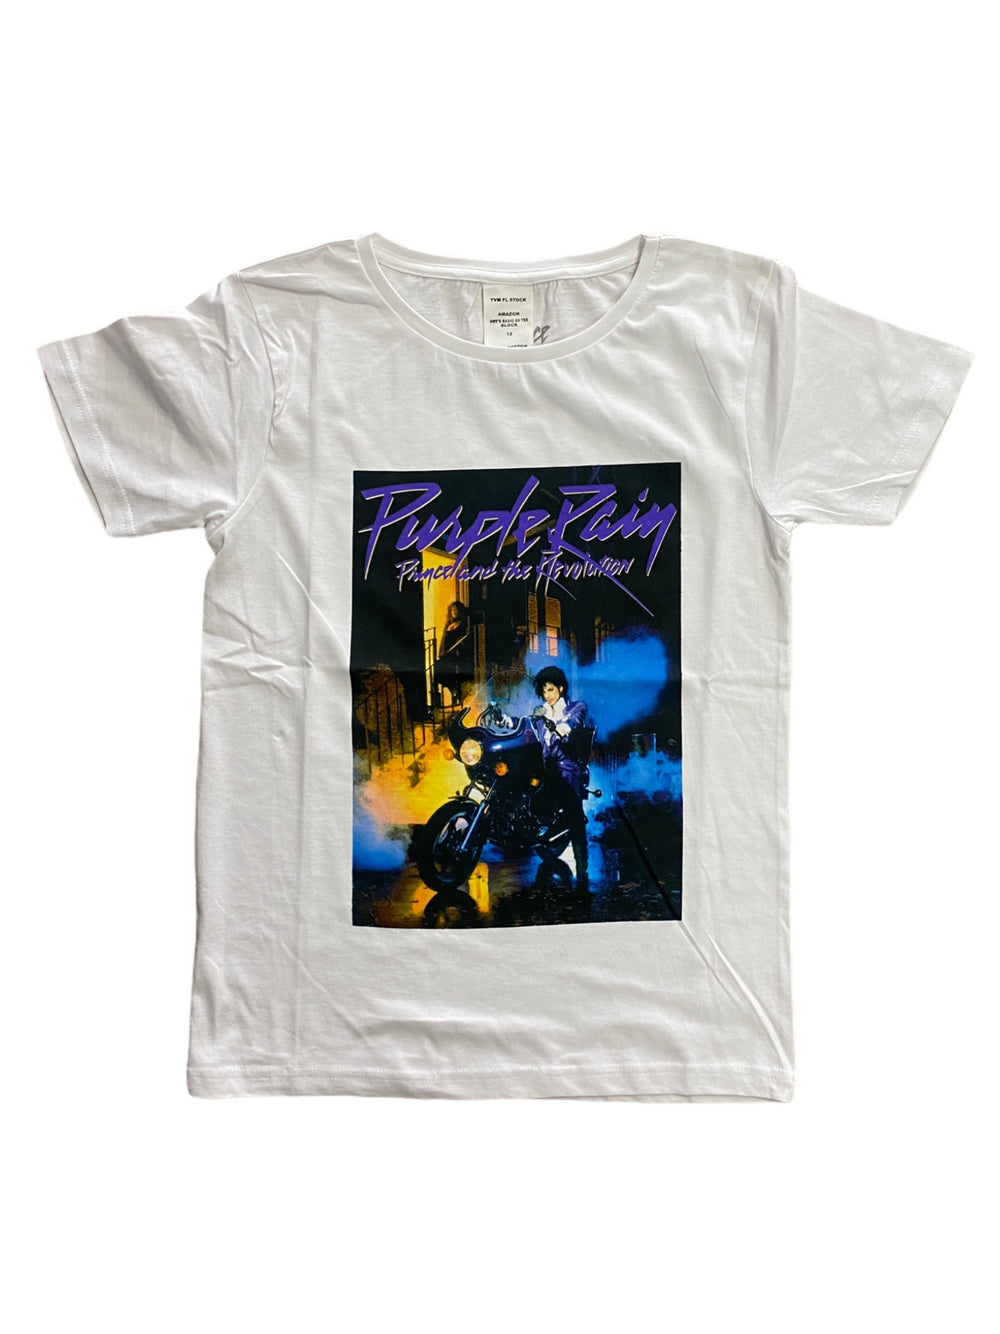 Prince – KIDS Official T Shirt Brand New Various Sizes Purple Rain WHITE NEW